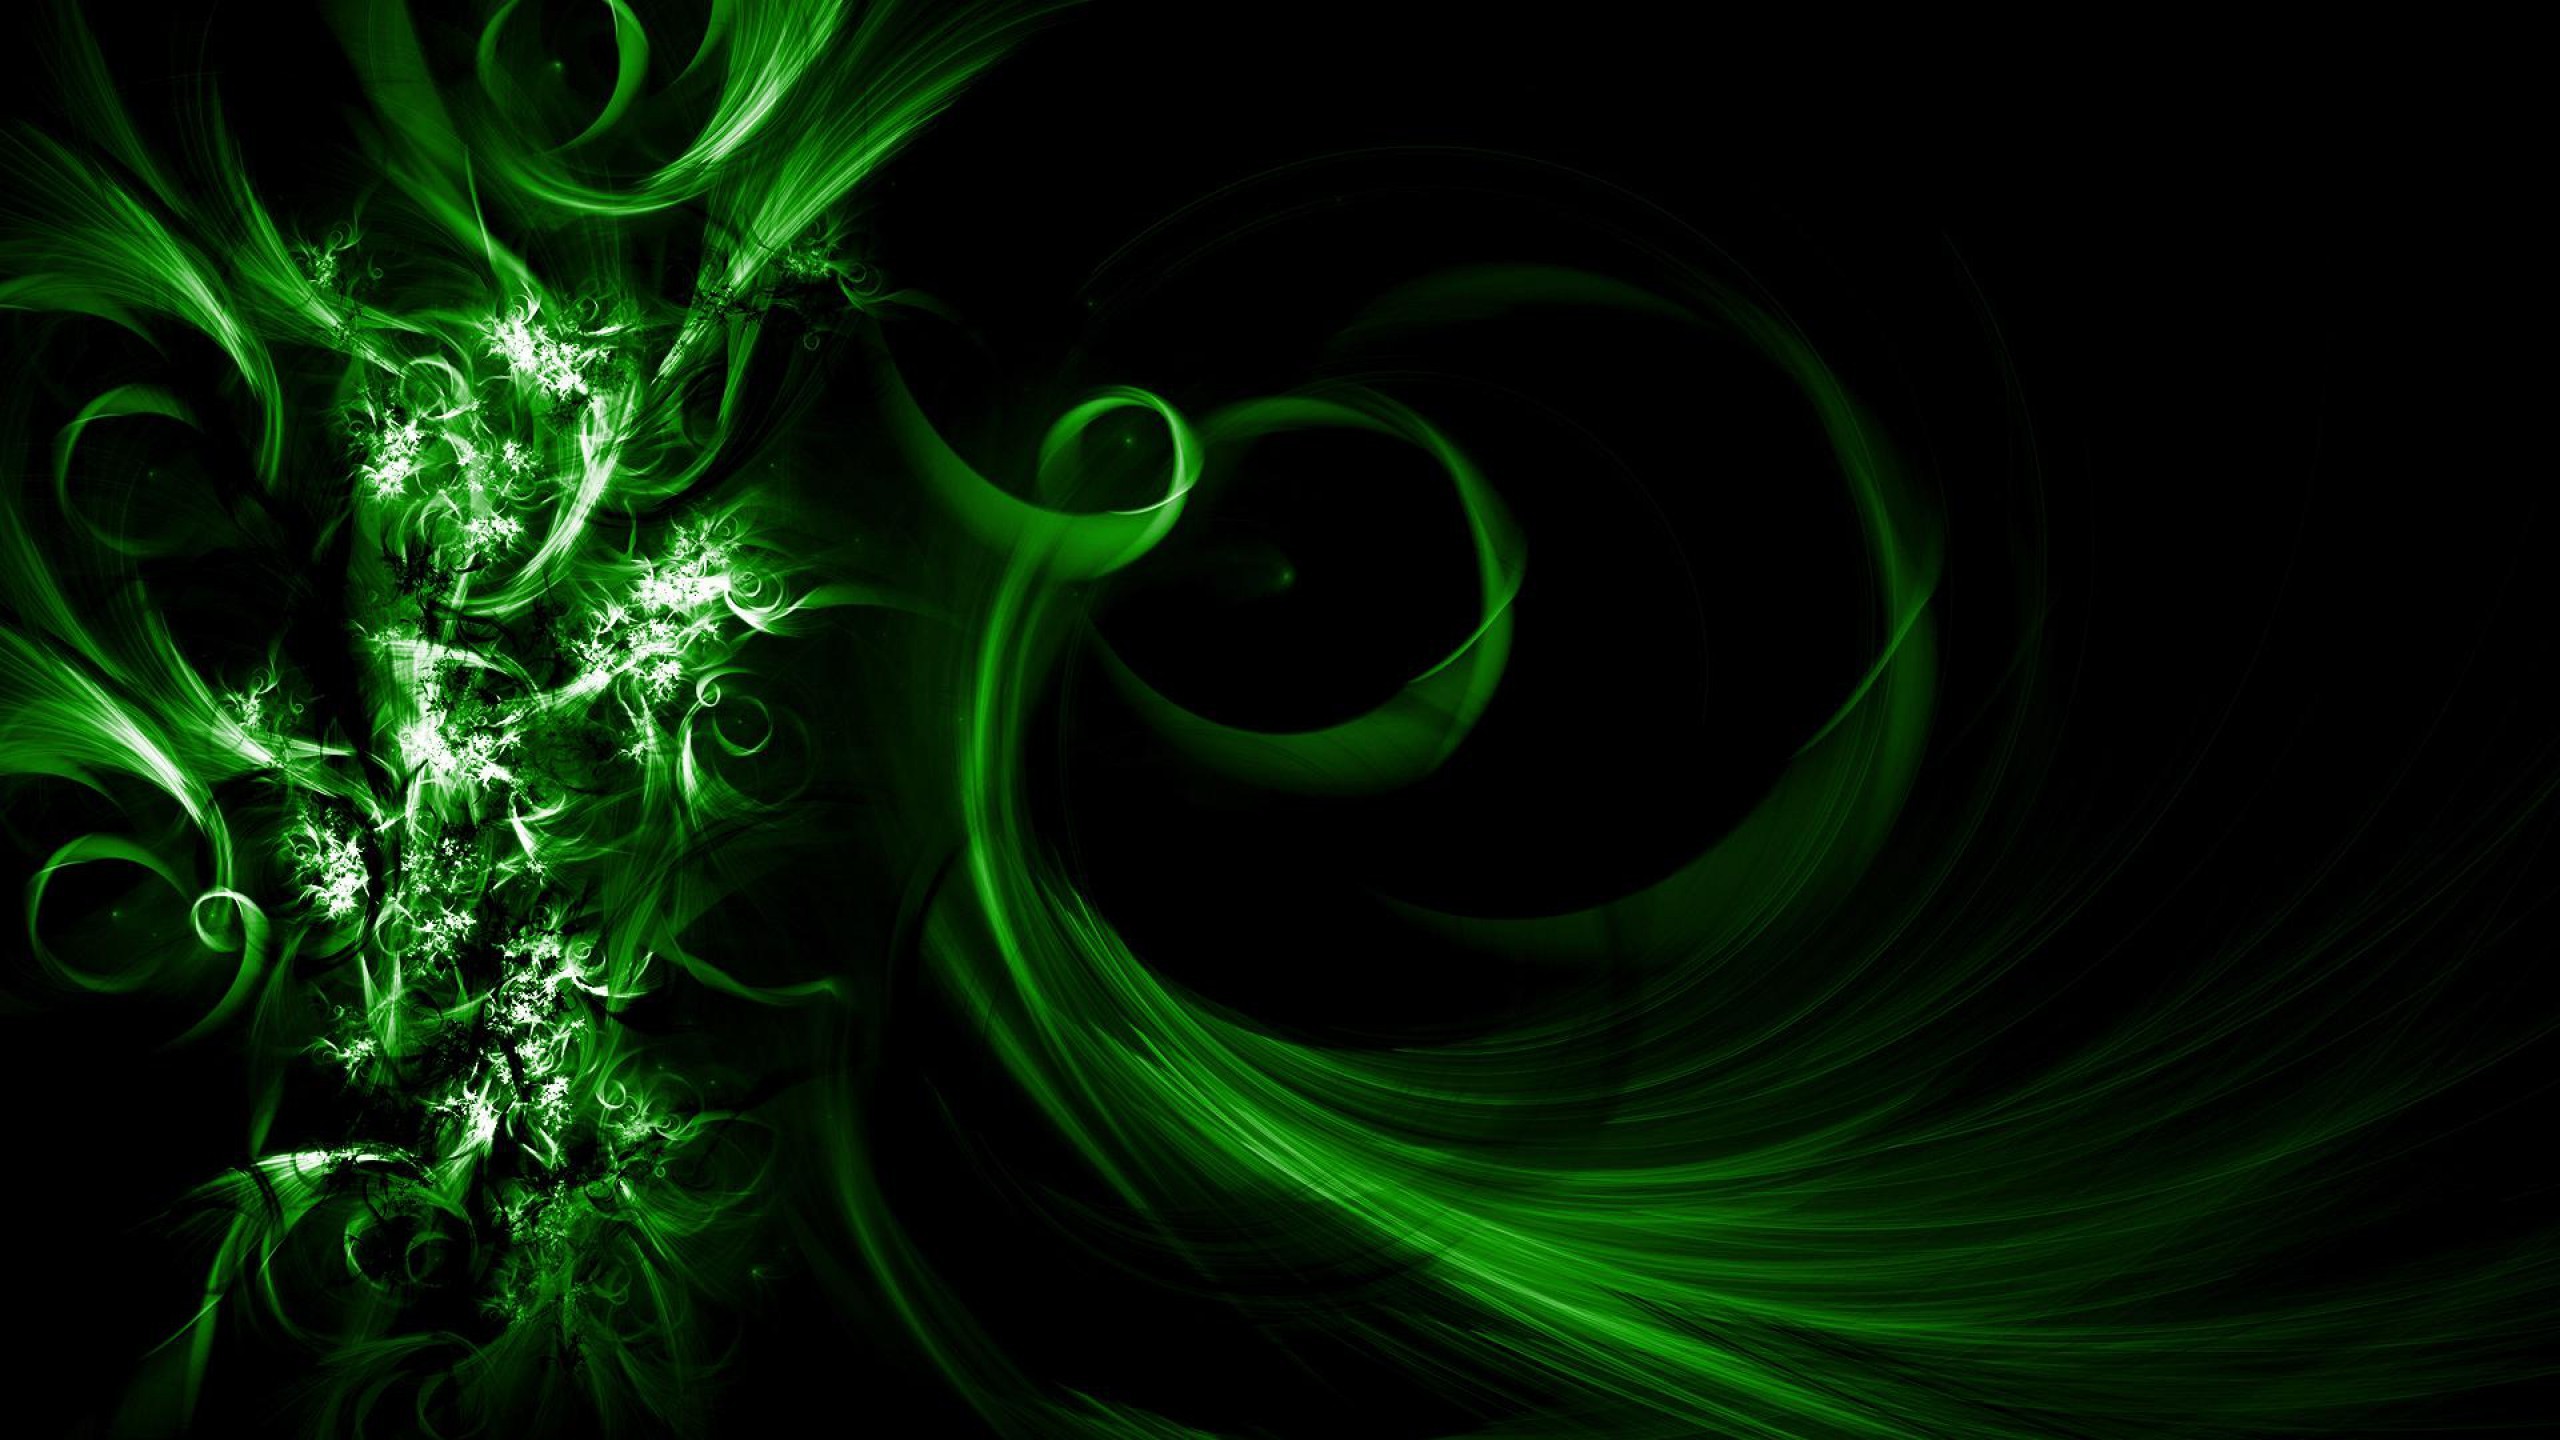 2560x1440 Cool Abstract Wallpaper with an Image of Dark Green Waves - HD Wallpapers  for Free